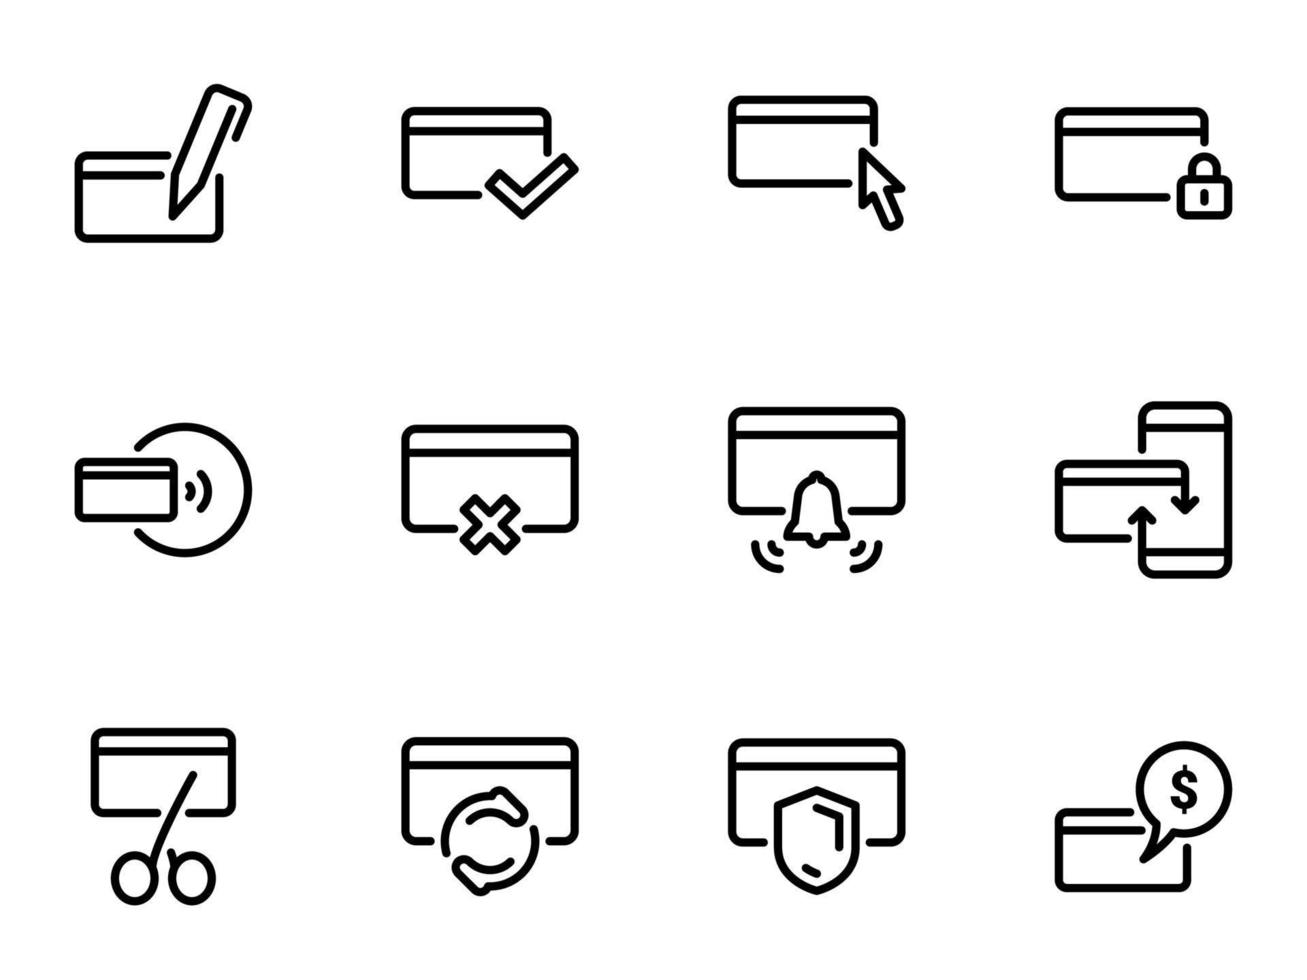 Set of black vector icons, isolated against white background. Illustration on a theme Card payments and cash